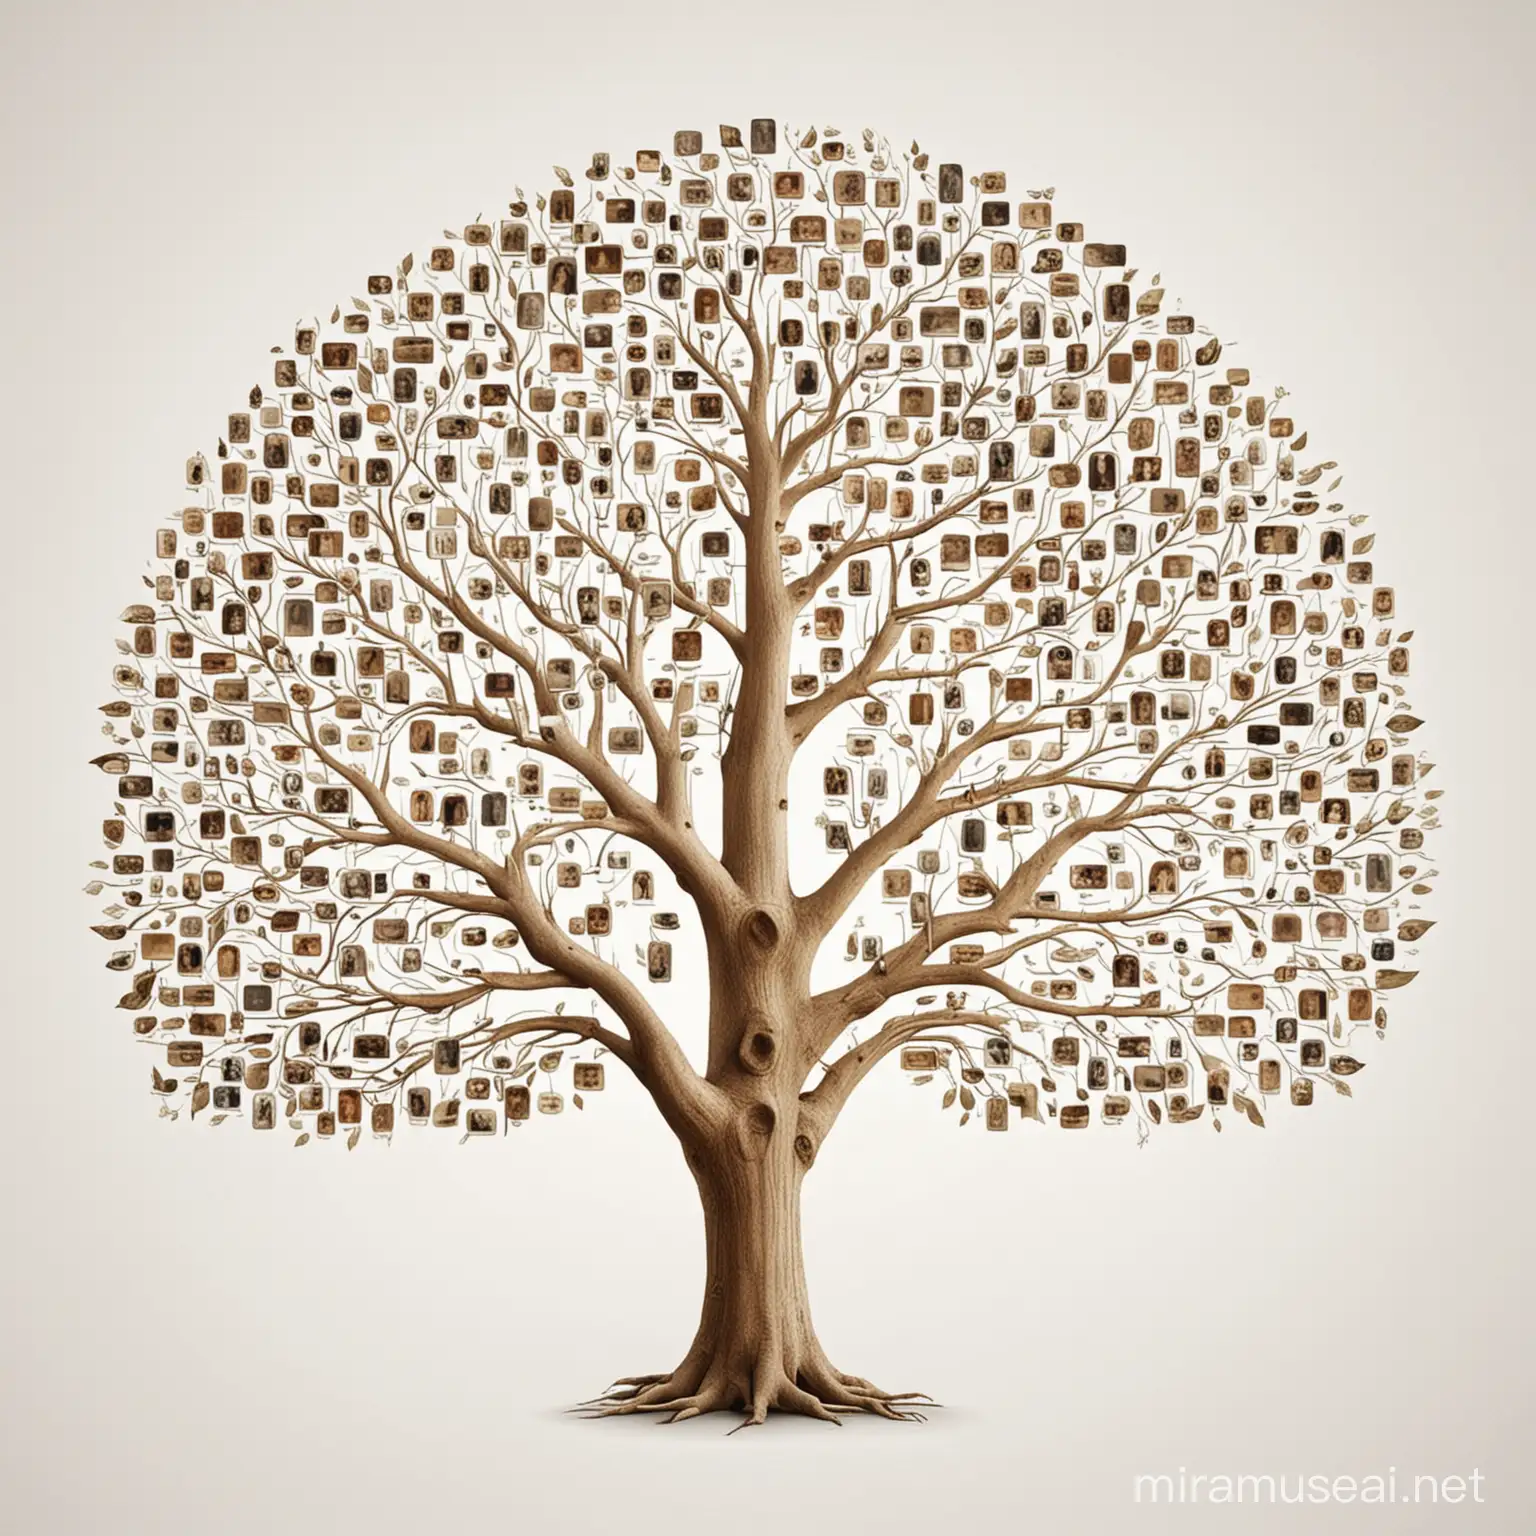 Multigenerational Family Tree on Clean White Background